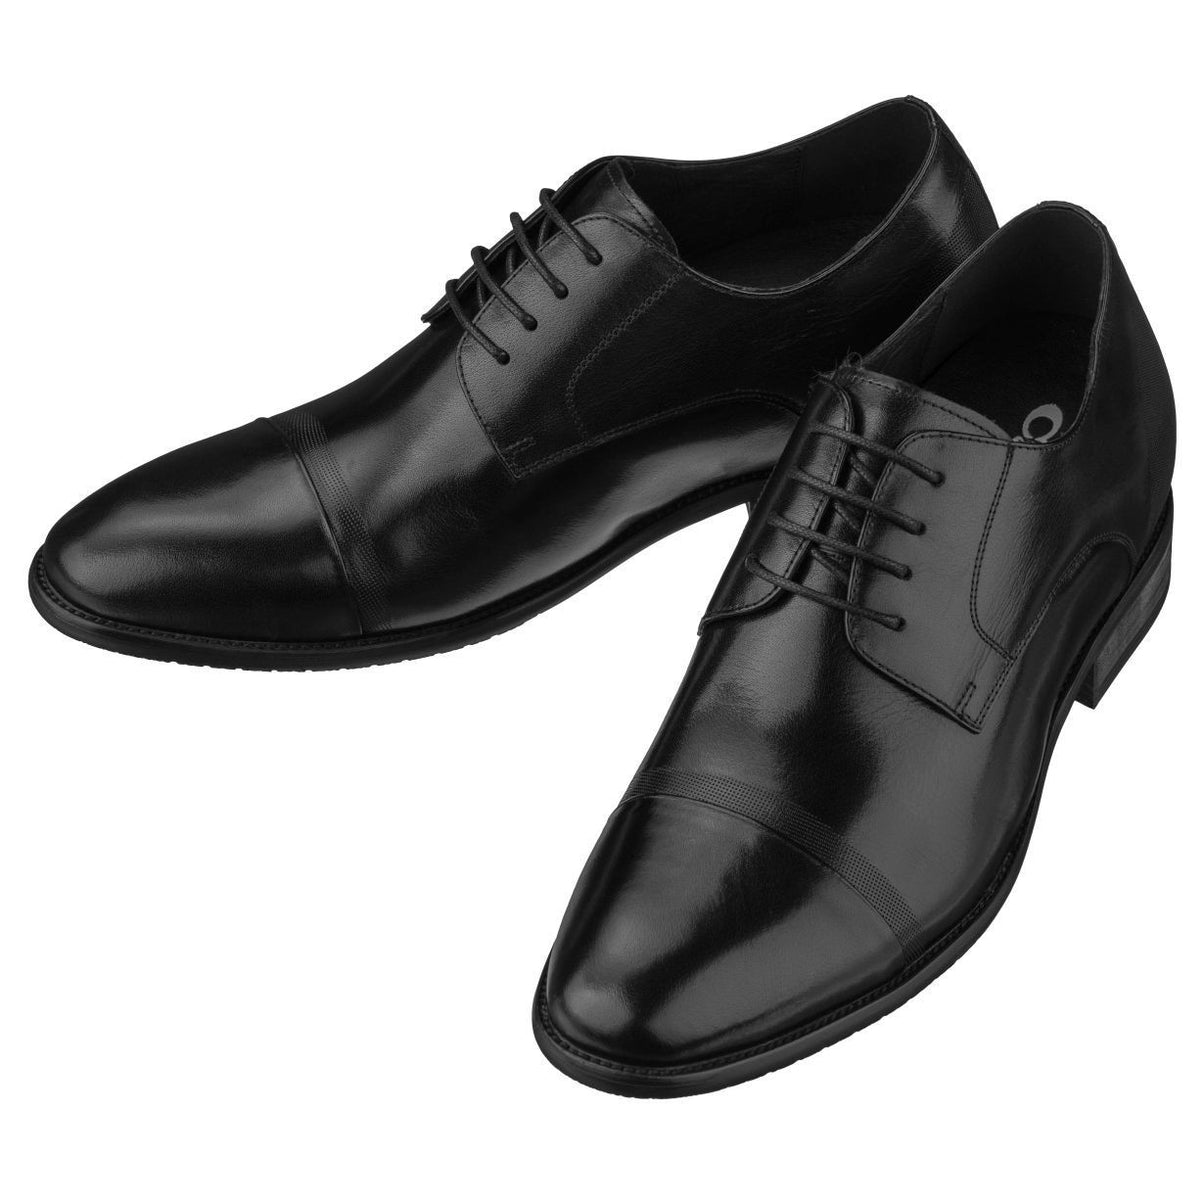 Elevator shoes height increase CALTO Black Formal Dress Shoes - Three Inches - Y1004